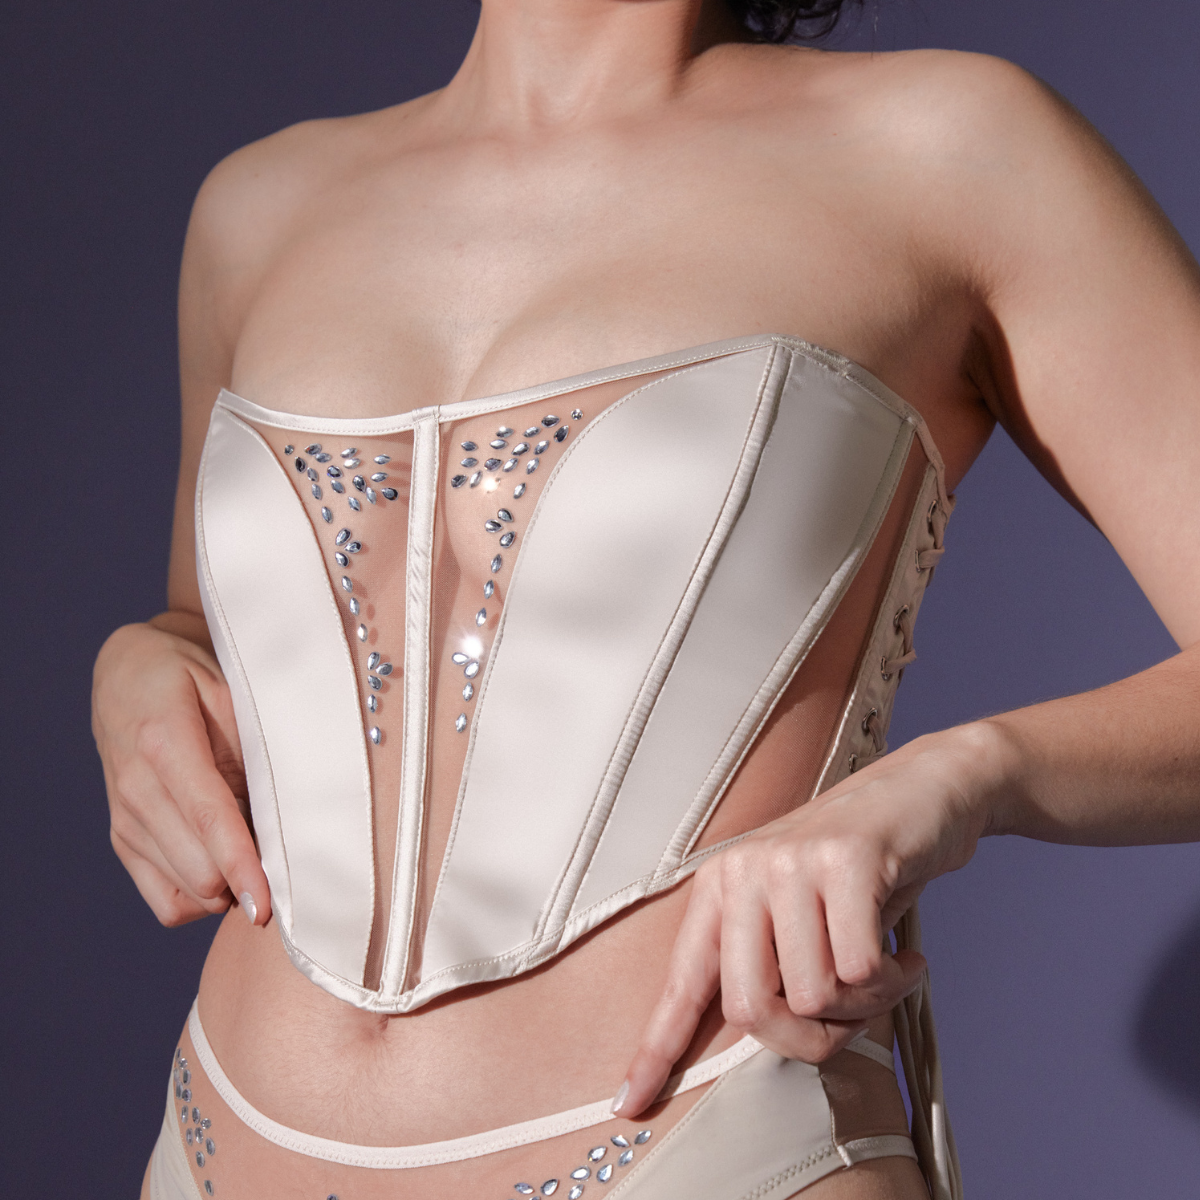 Nippies Skin - Caramel  Thistle and Spire Lingerie